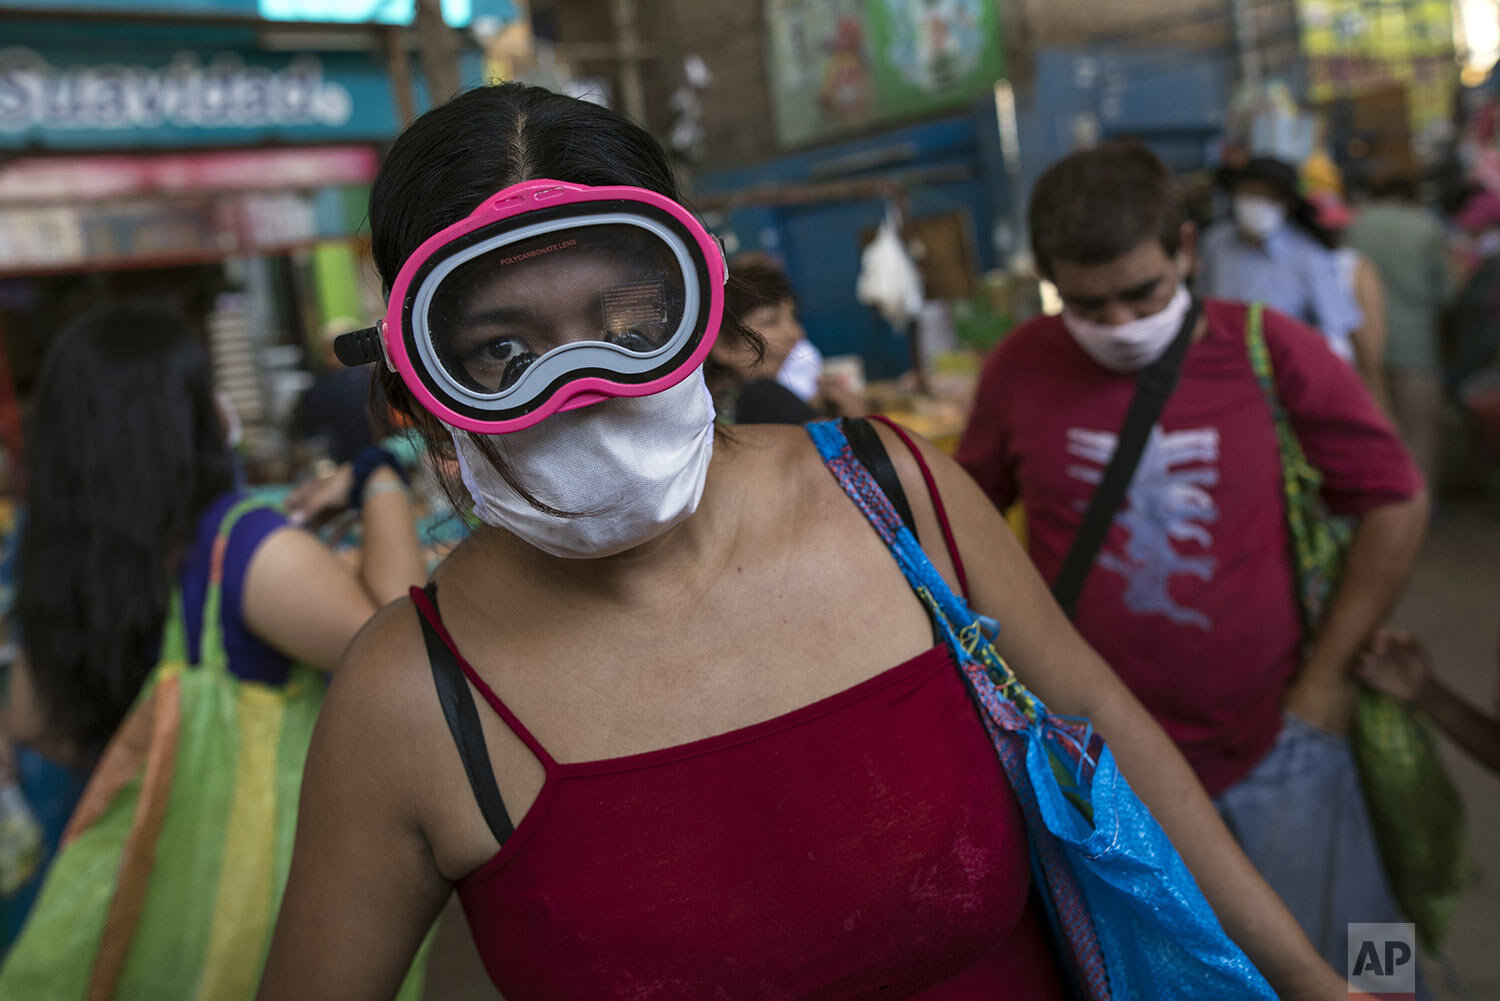  A woman wears a snorkel mask and a surgical face mask as a precaution amid the spread of the new coronavirus while shopping at a market in Lima, Peru, March 23, 2020. (AP Photo/Rodrigo Abd) 